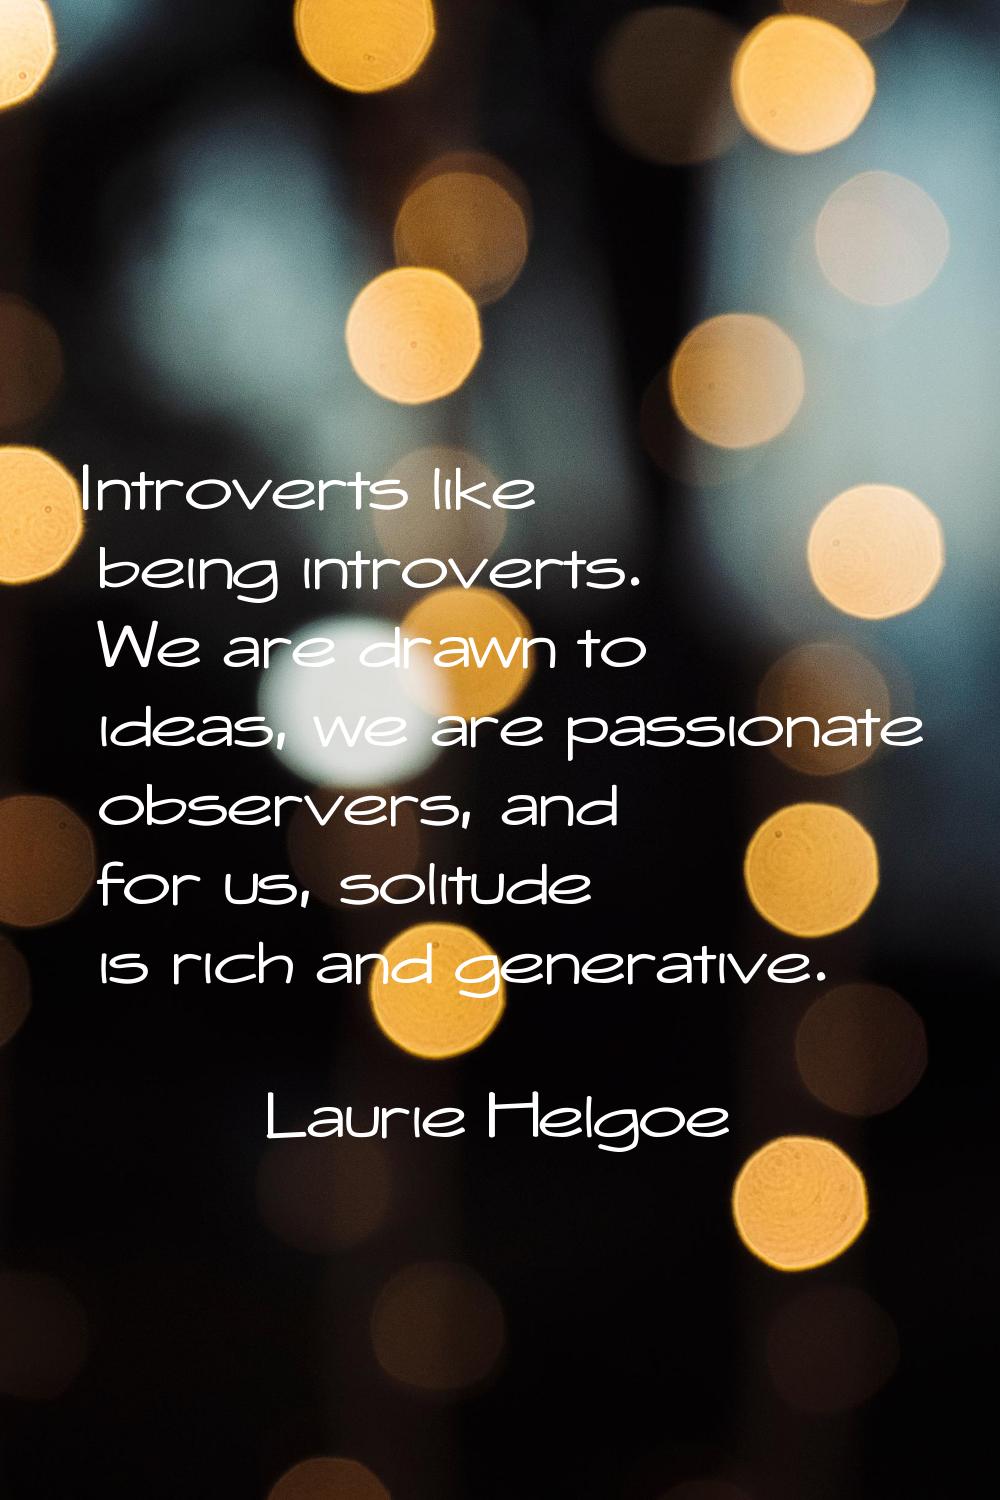 Introverts like being introverts. We are drawn to ideas, we are passionate observers, and for us, s